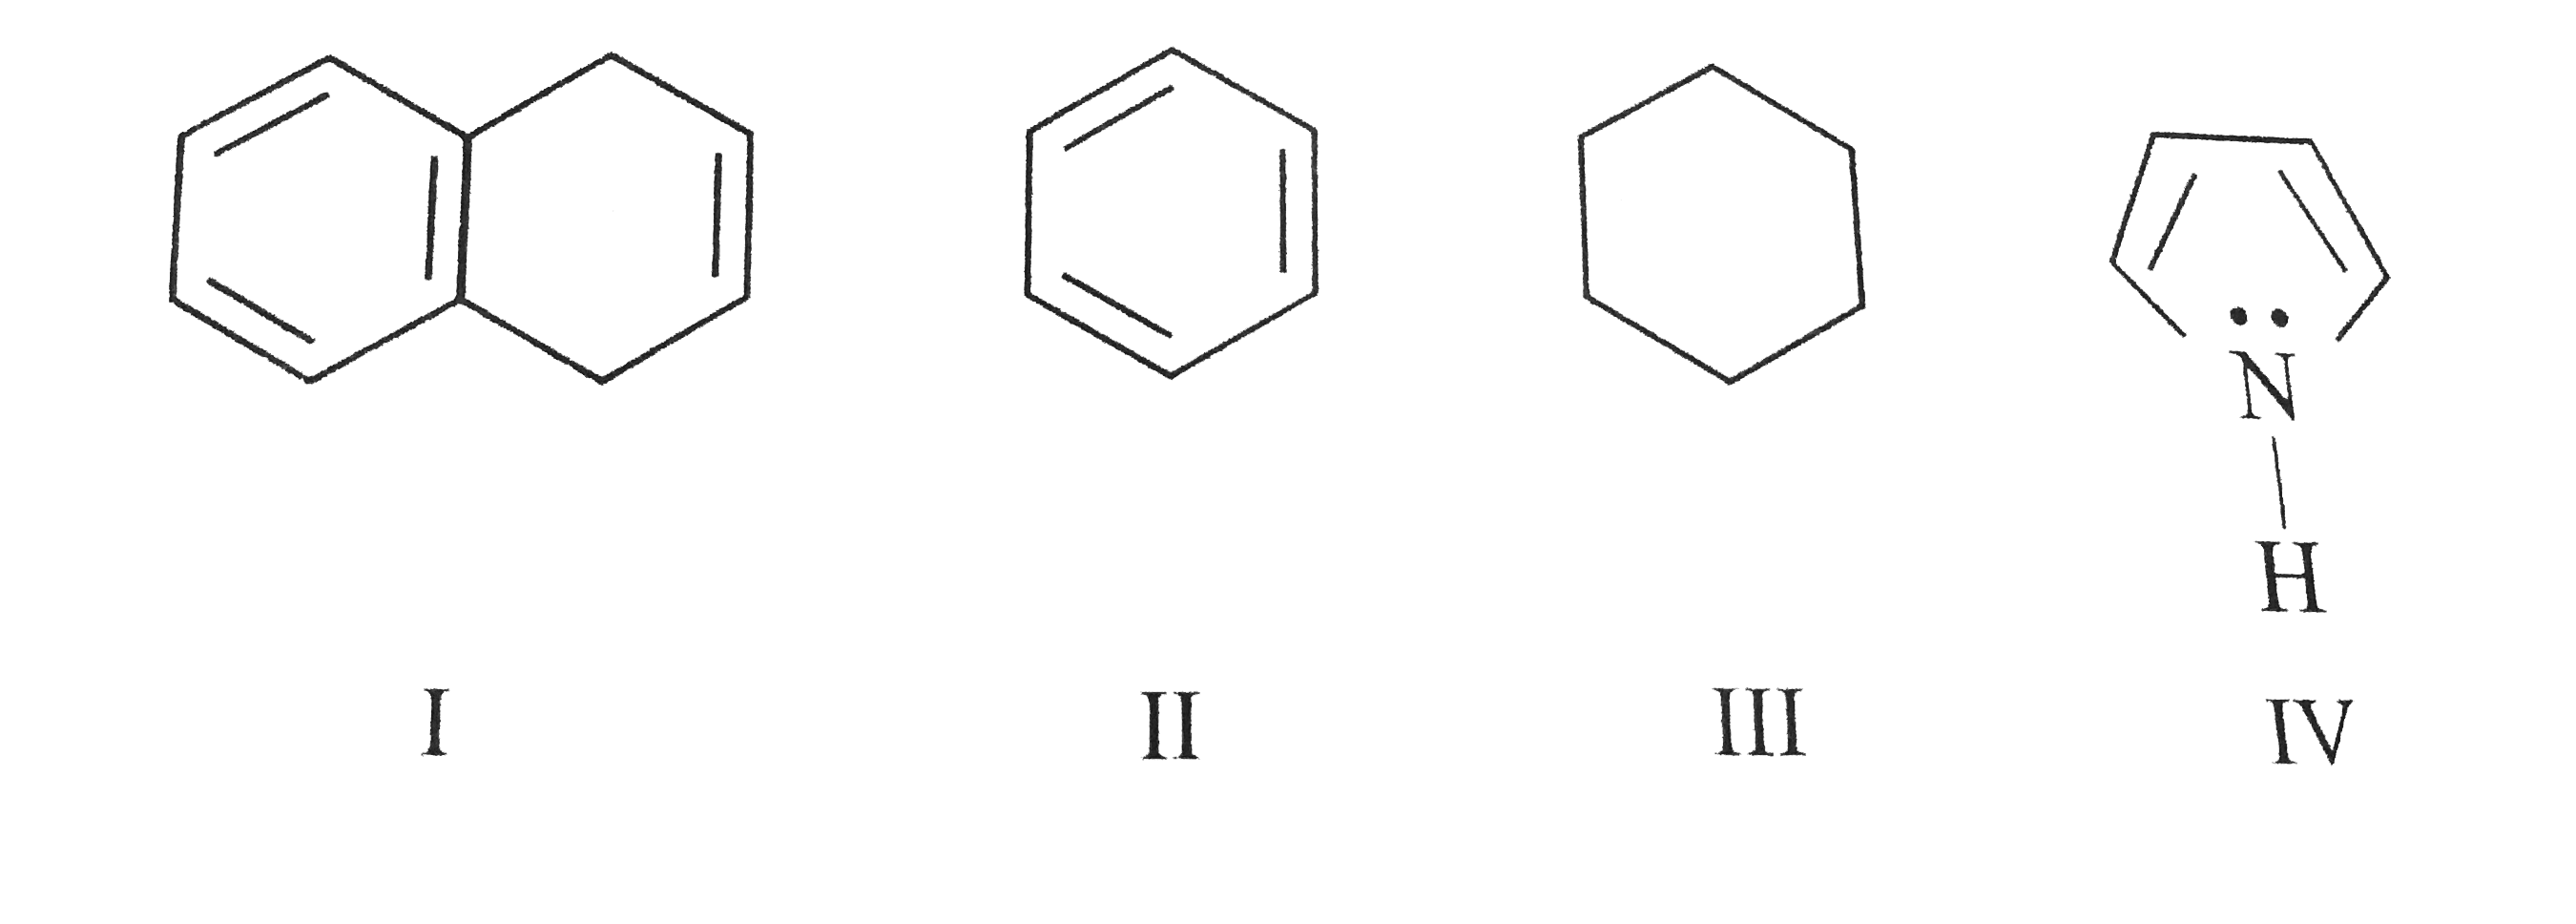 Which of the following compounds will show aromatic character?